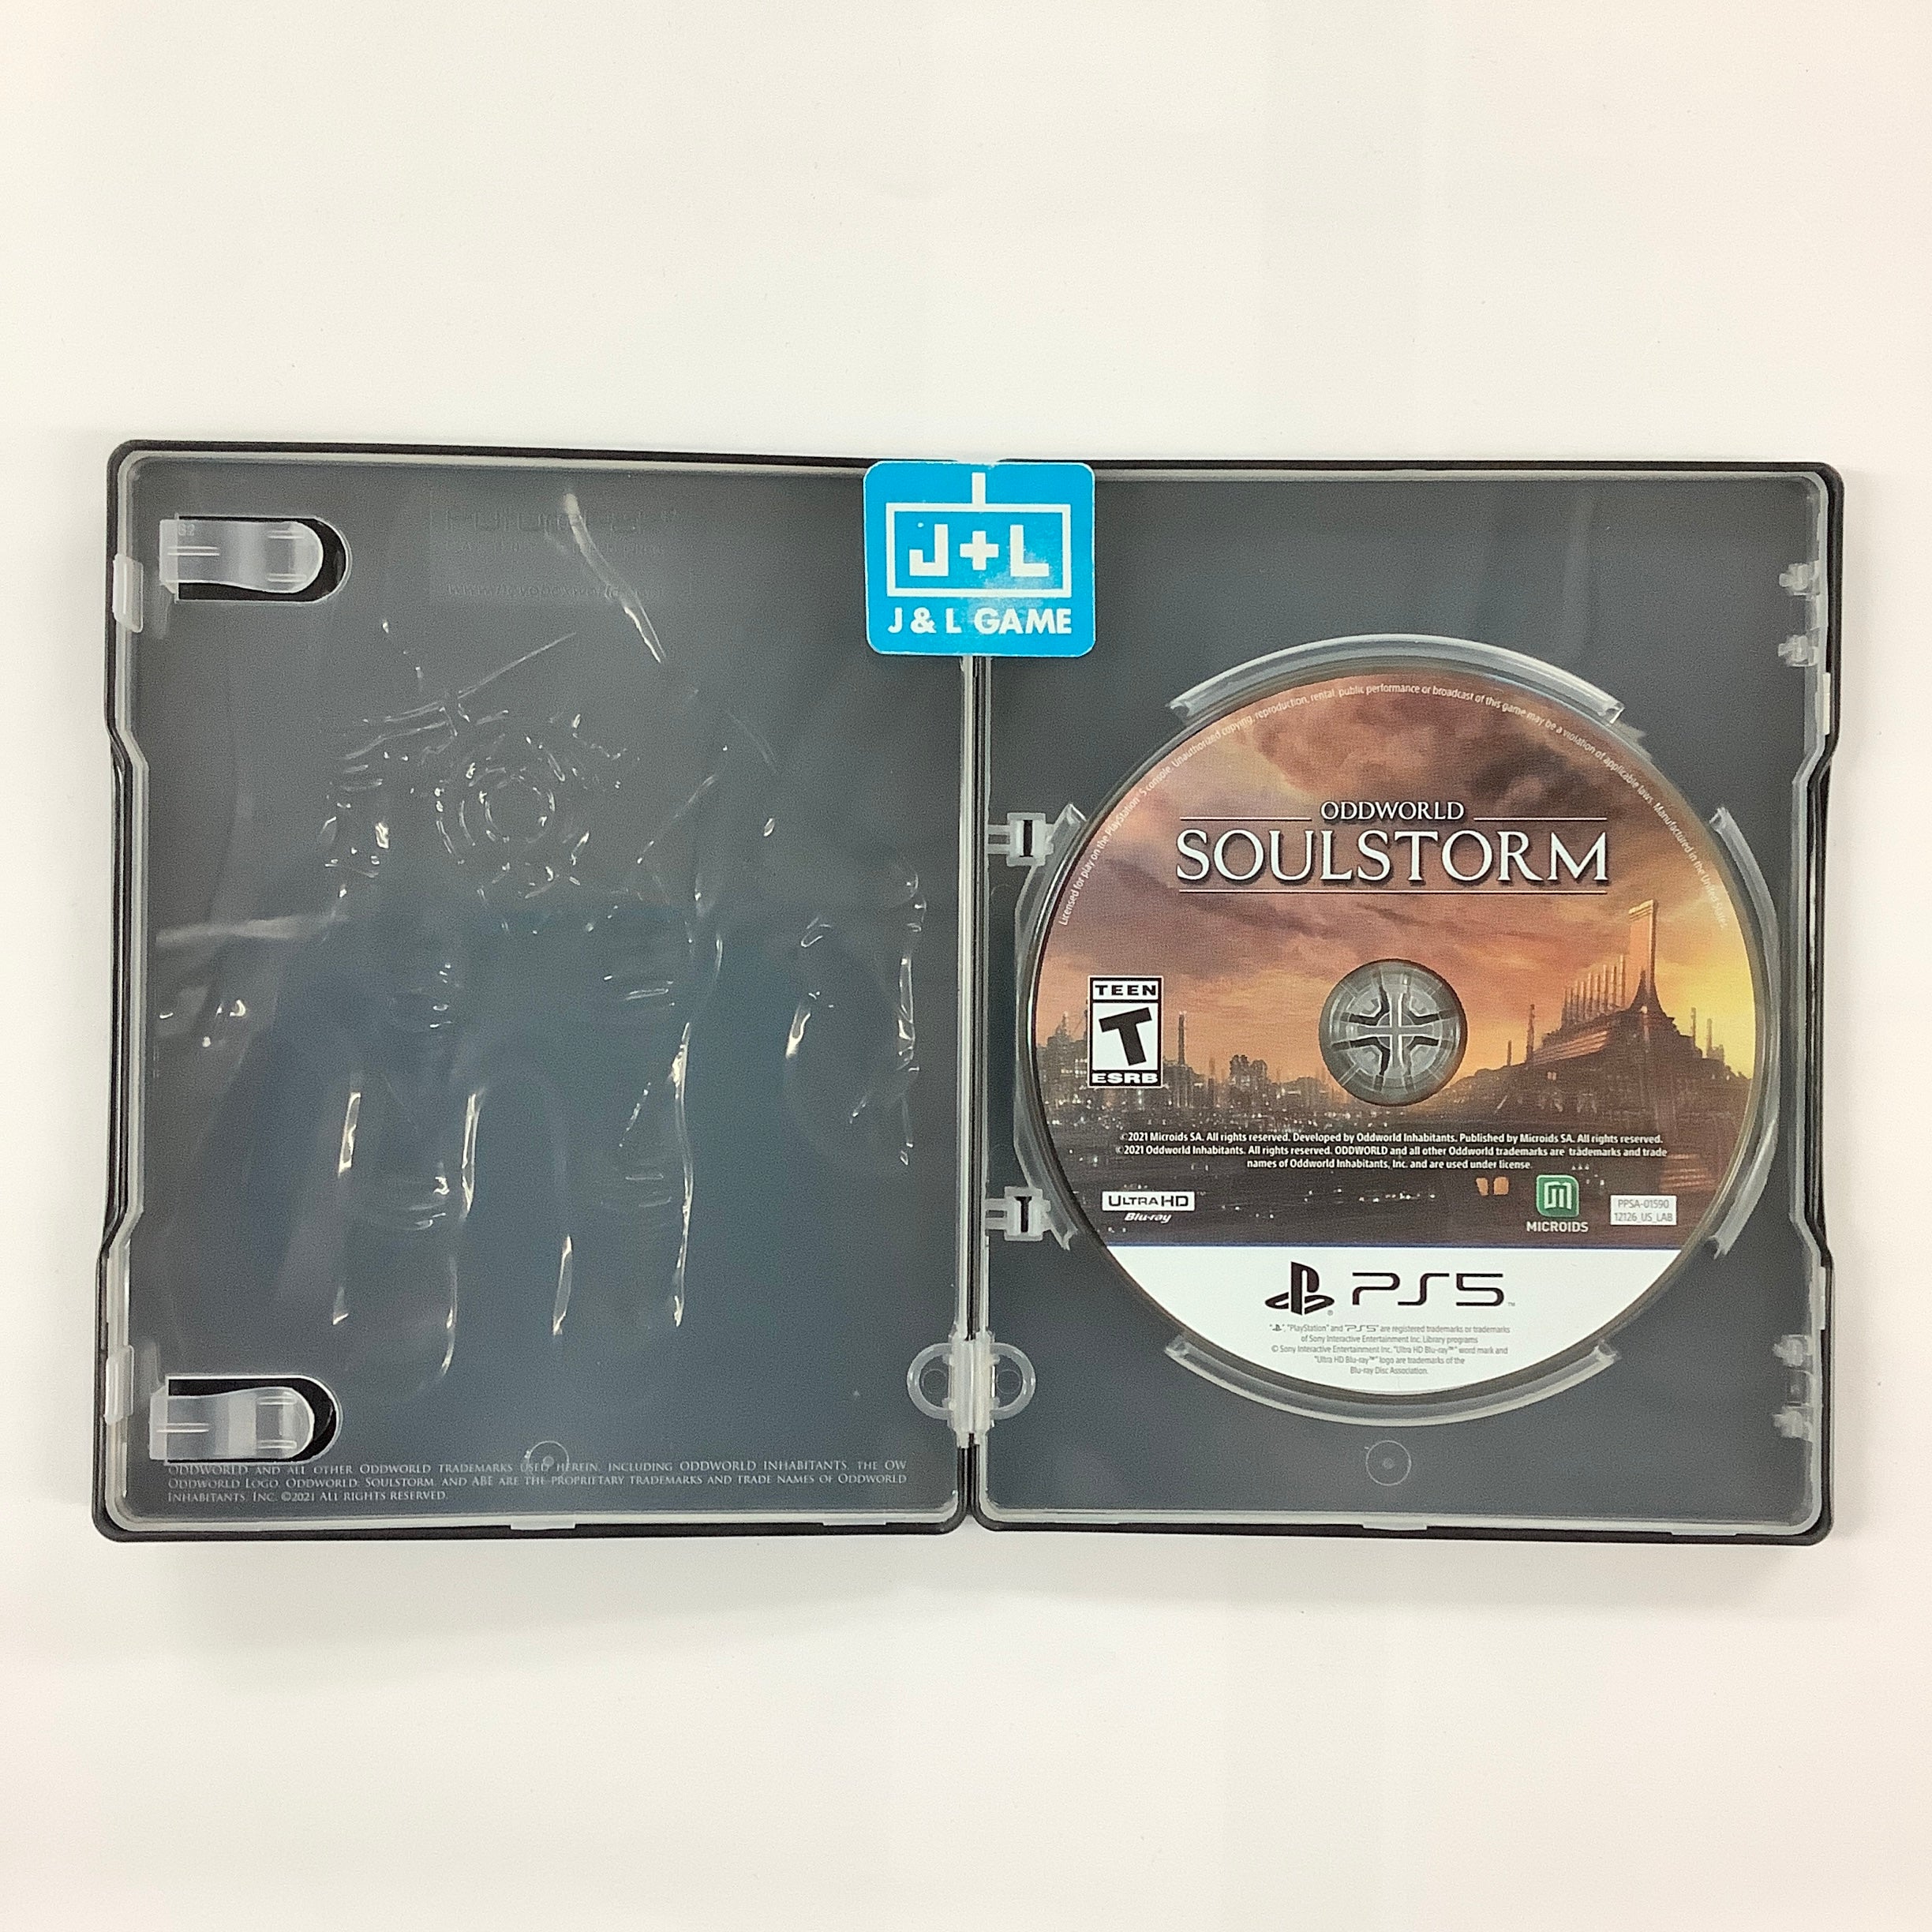 Oddworld: Soulstorm Day One Oddition - (PS5) PlayStation 5 [UNBOXING] Video Games Microids   